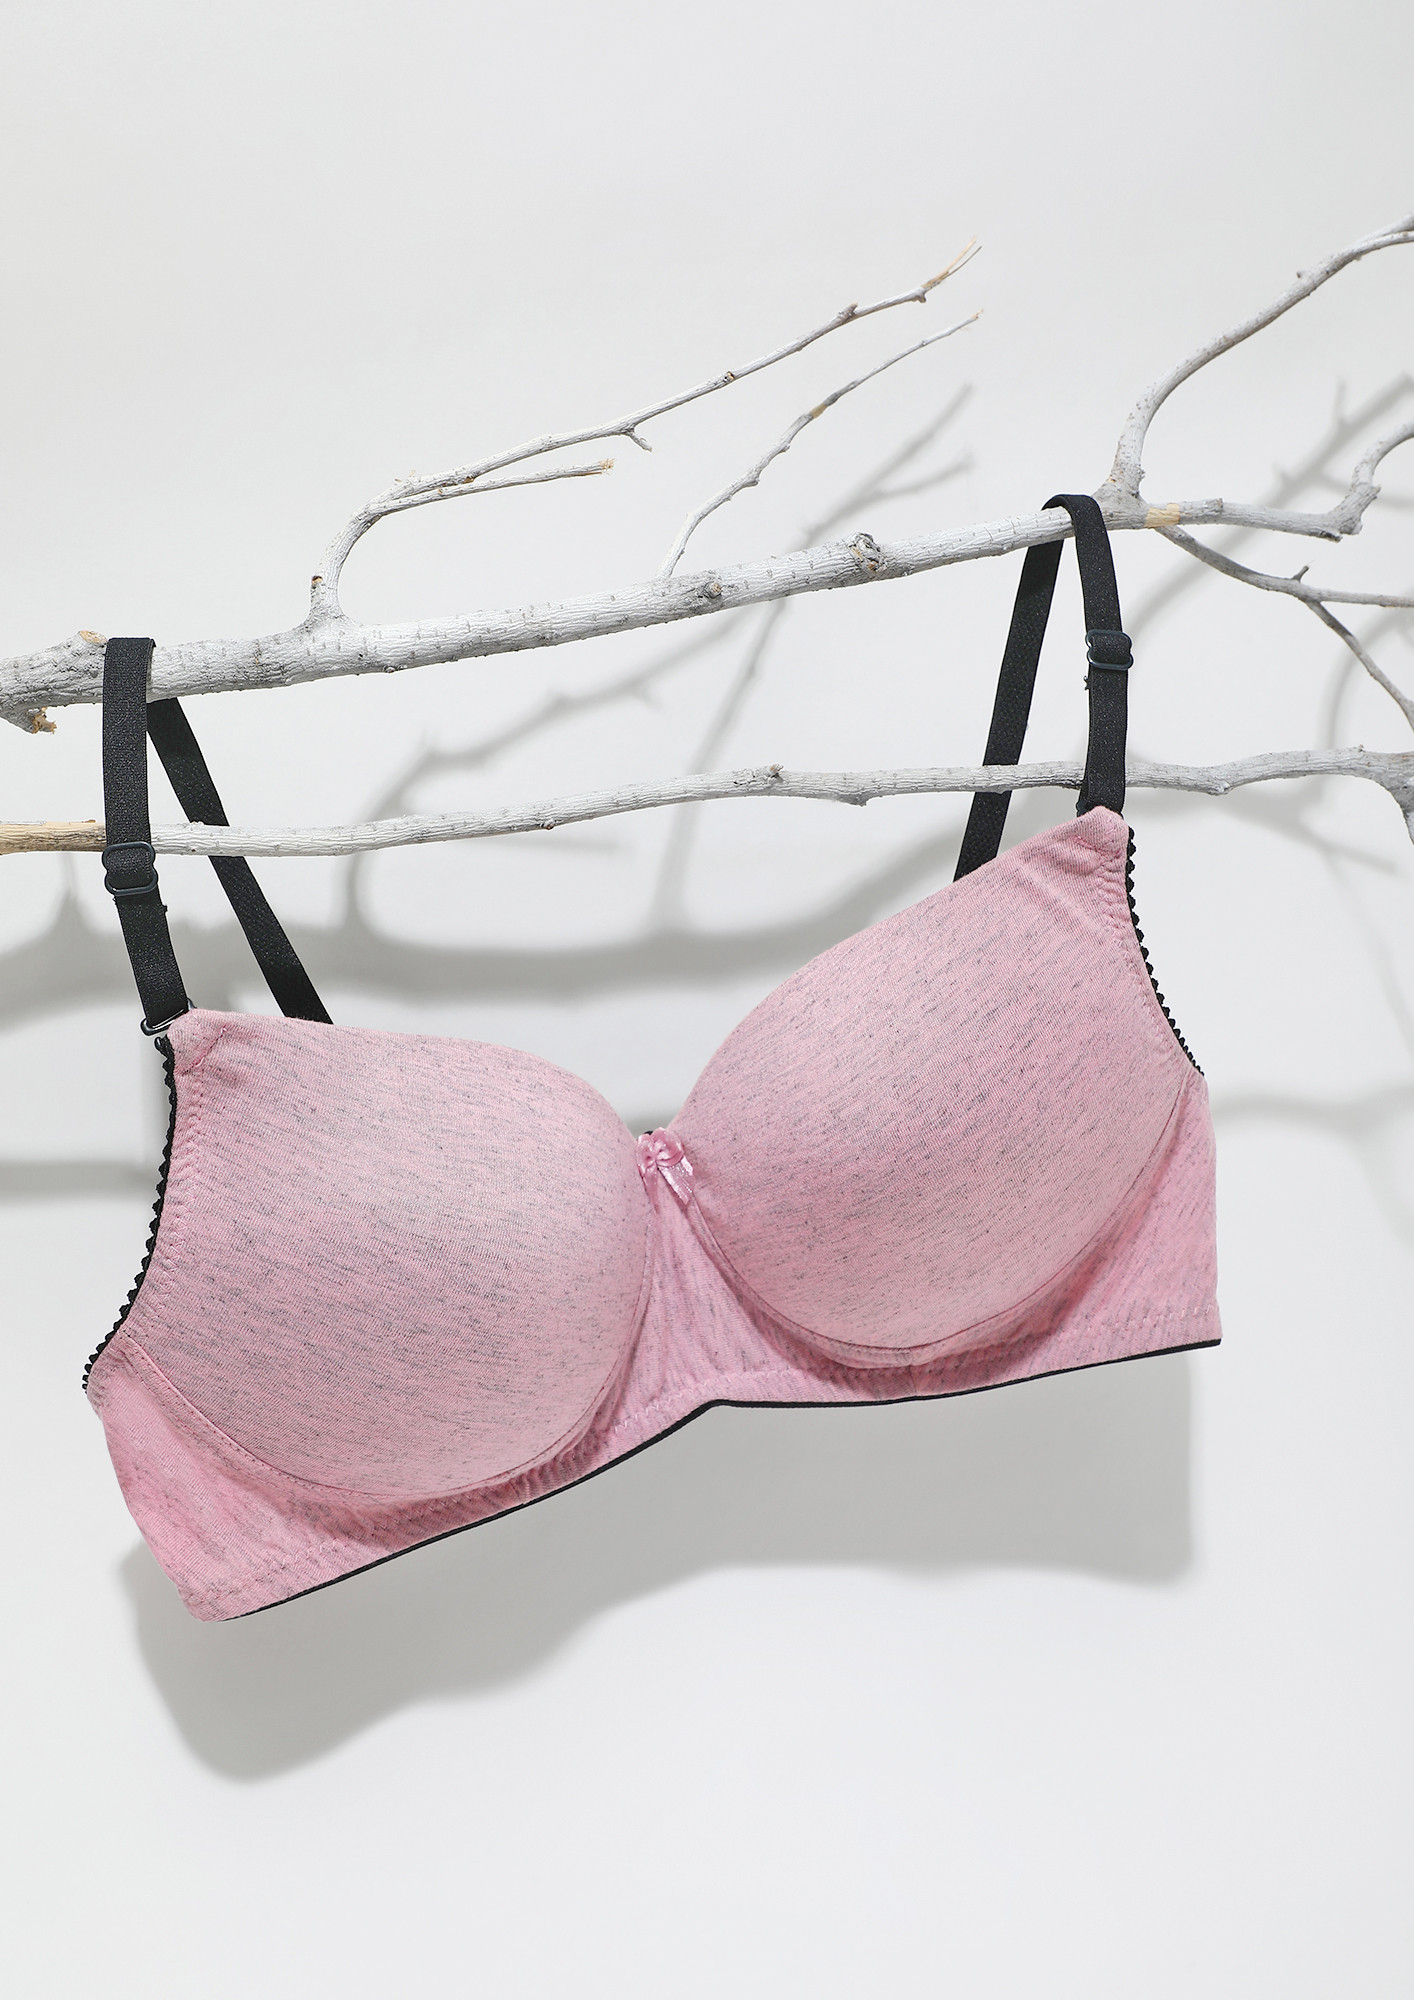 LIHTLY PADDED FOR COMFORT PINK BRA